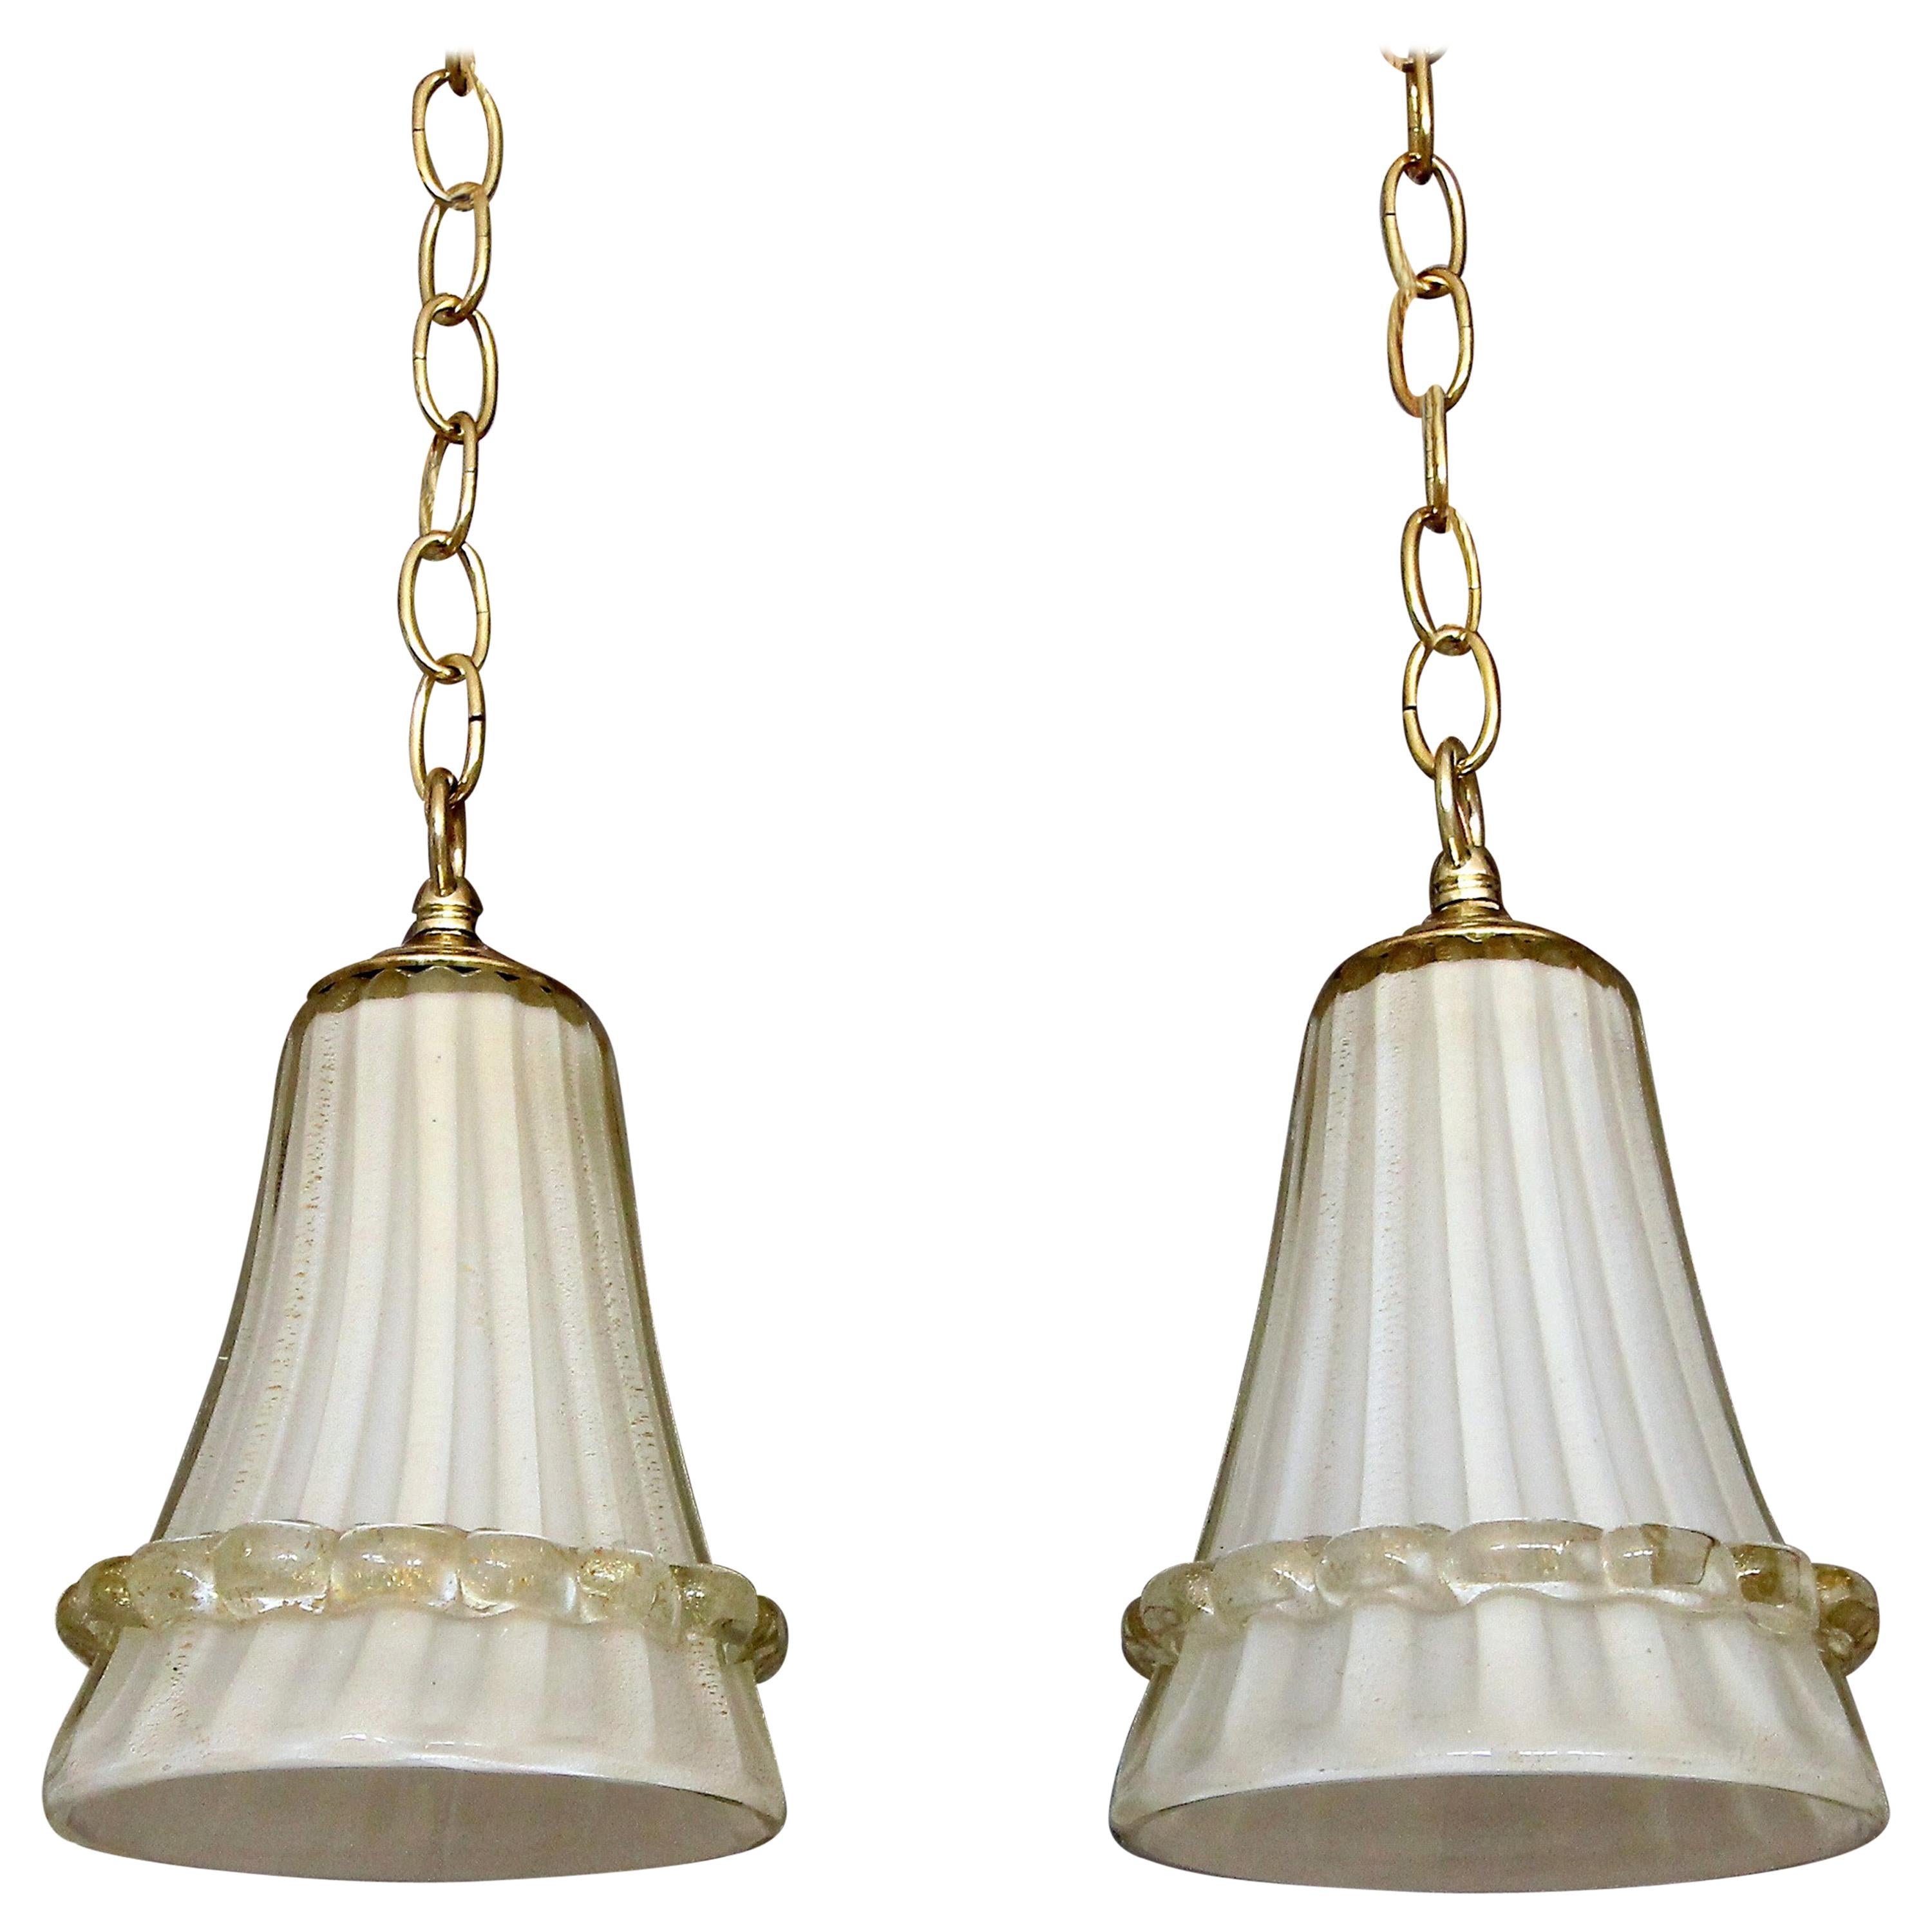 Pair of Murano Glass Cream and Gold Ceiling Light Pendants